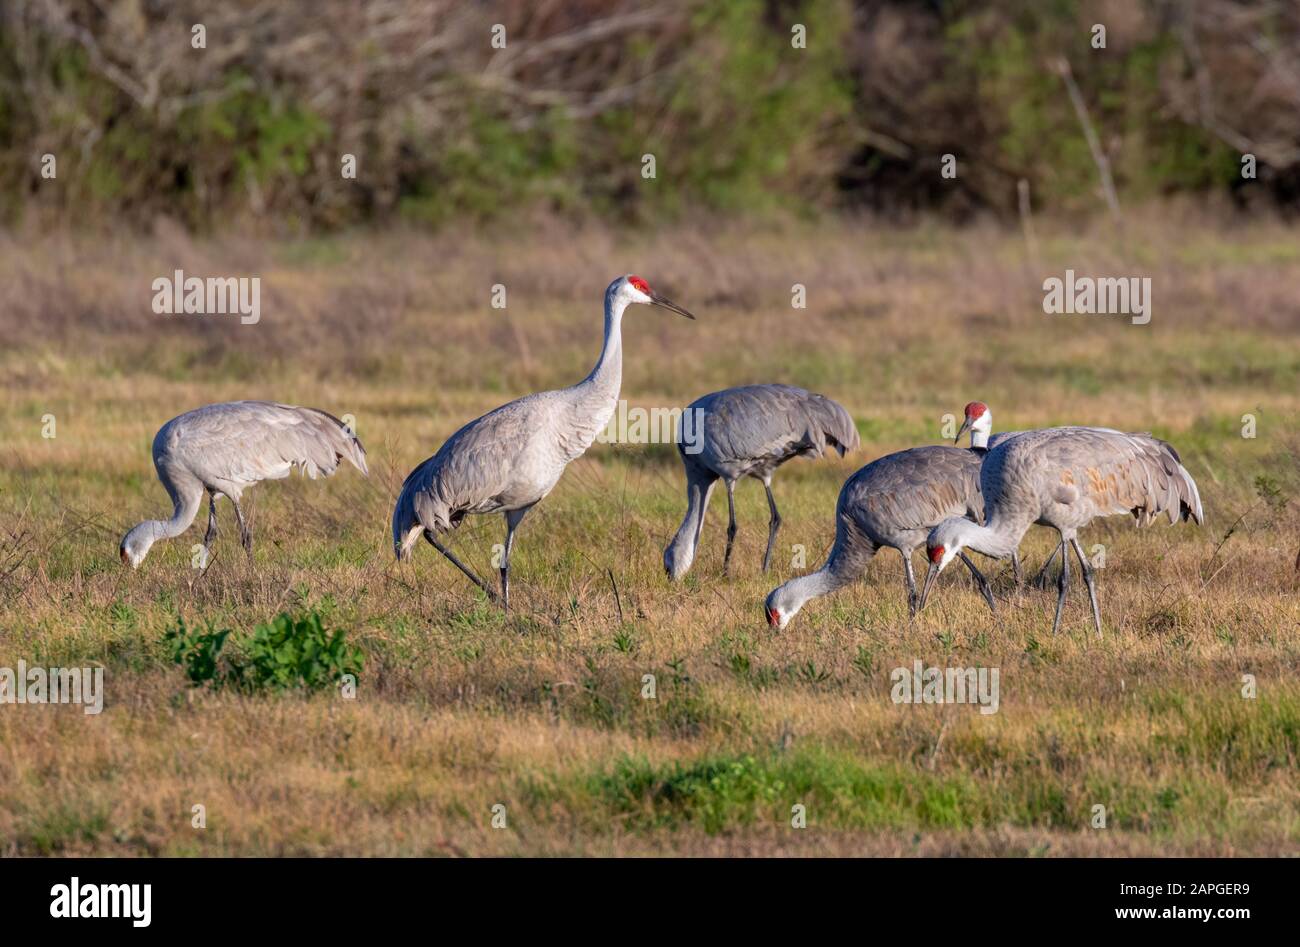 Group of sandhill cranes (Antigone canadensis) feeding on meadow while one is watching the vicinity, Galveston, Texas, USA Stock Photo